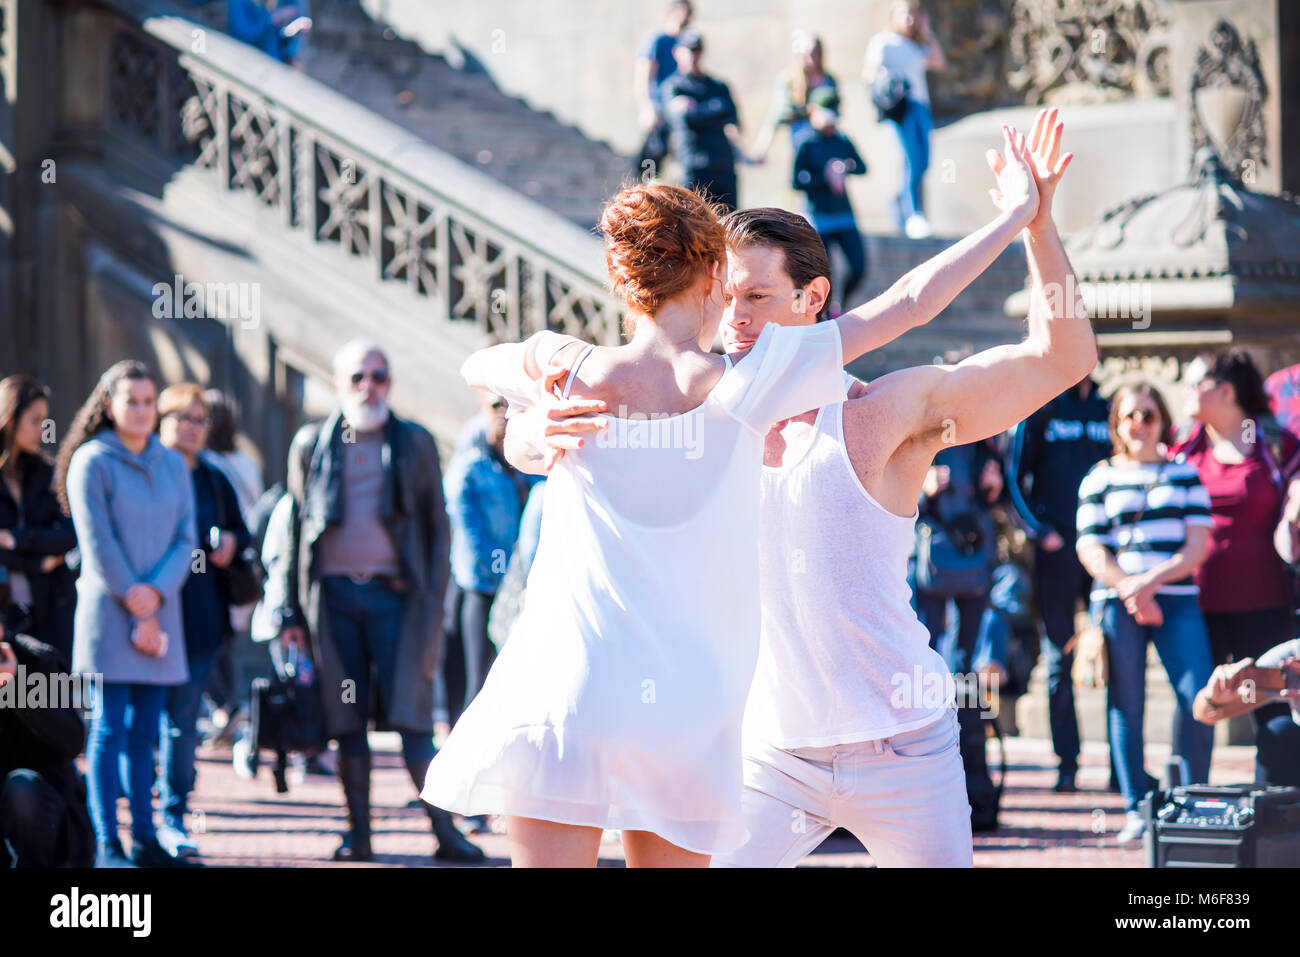 New York City, USA - October 28, 2017: Manhattan NYC Central park at Bethesda Arcade terrace couple of dancers in white clothing young millennials clo Stock Photo